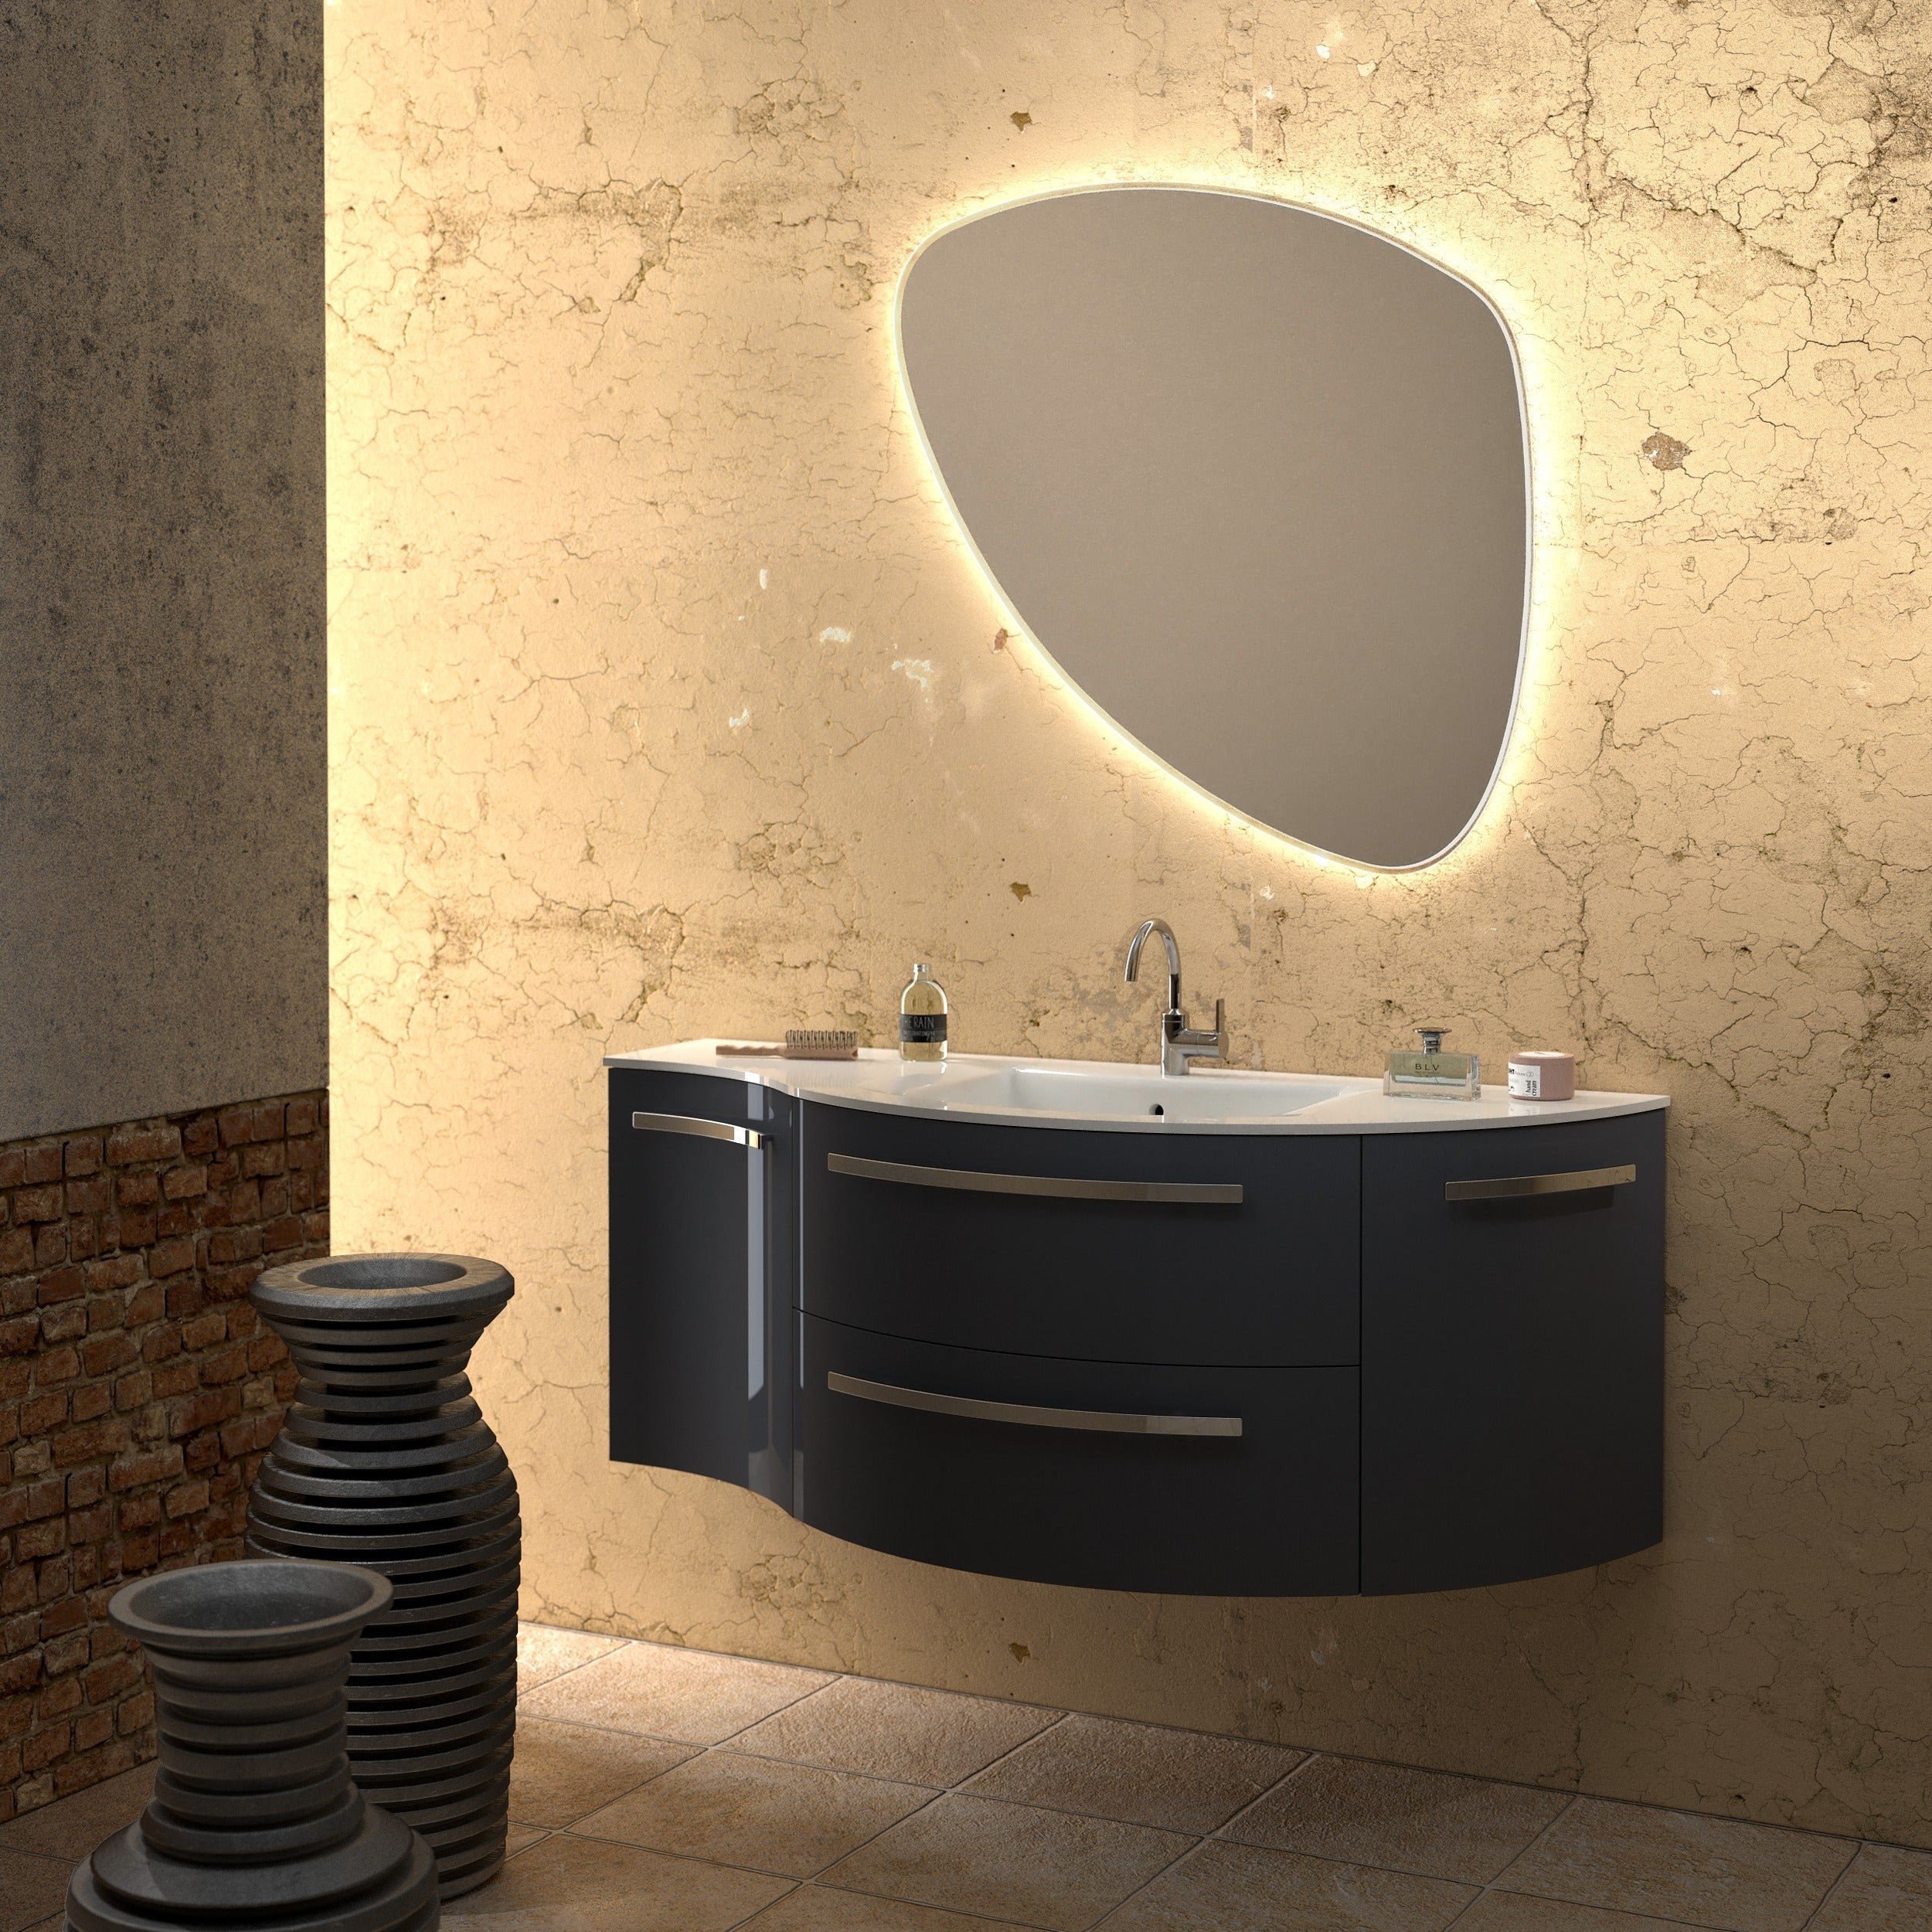 Latoscana 52" Ameno Modern Bathroom Vanity Kit With Left Concave and Right Rounded Cabinet